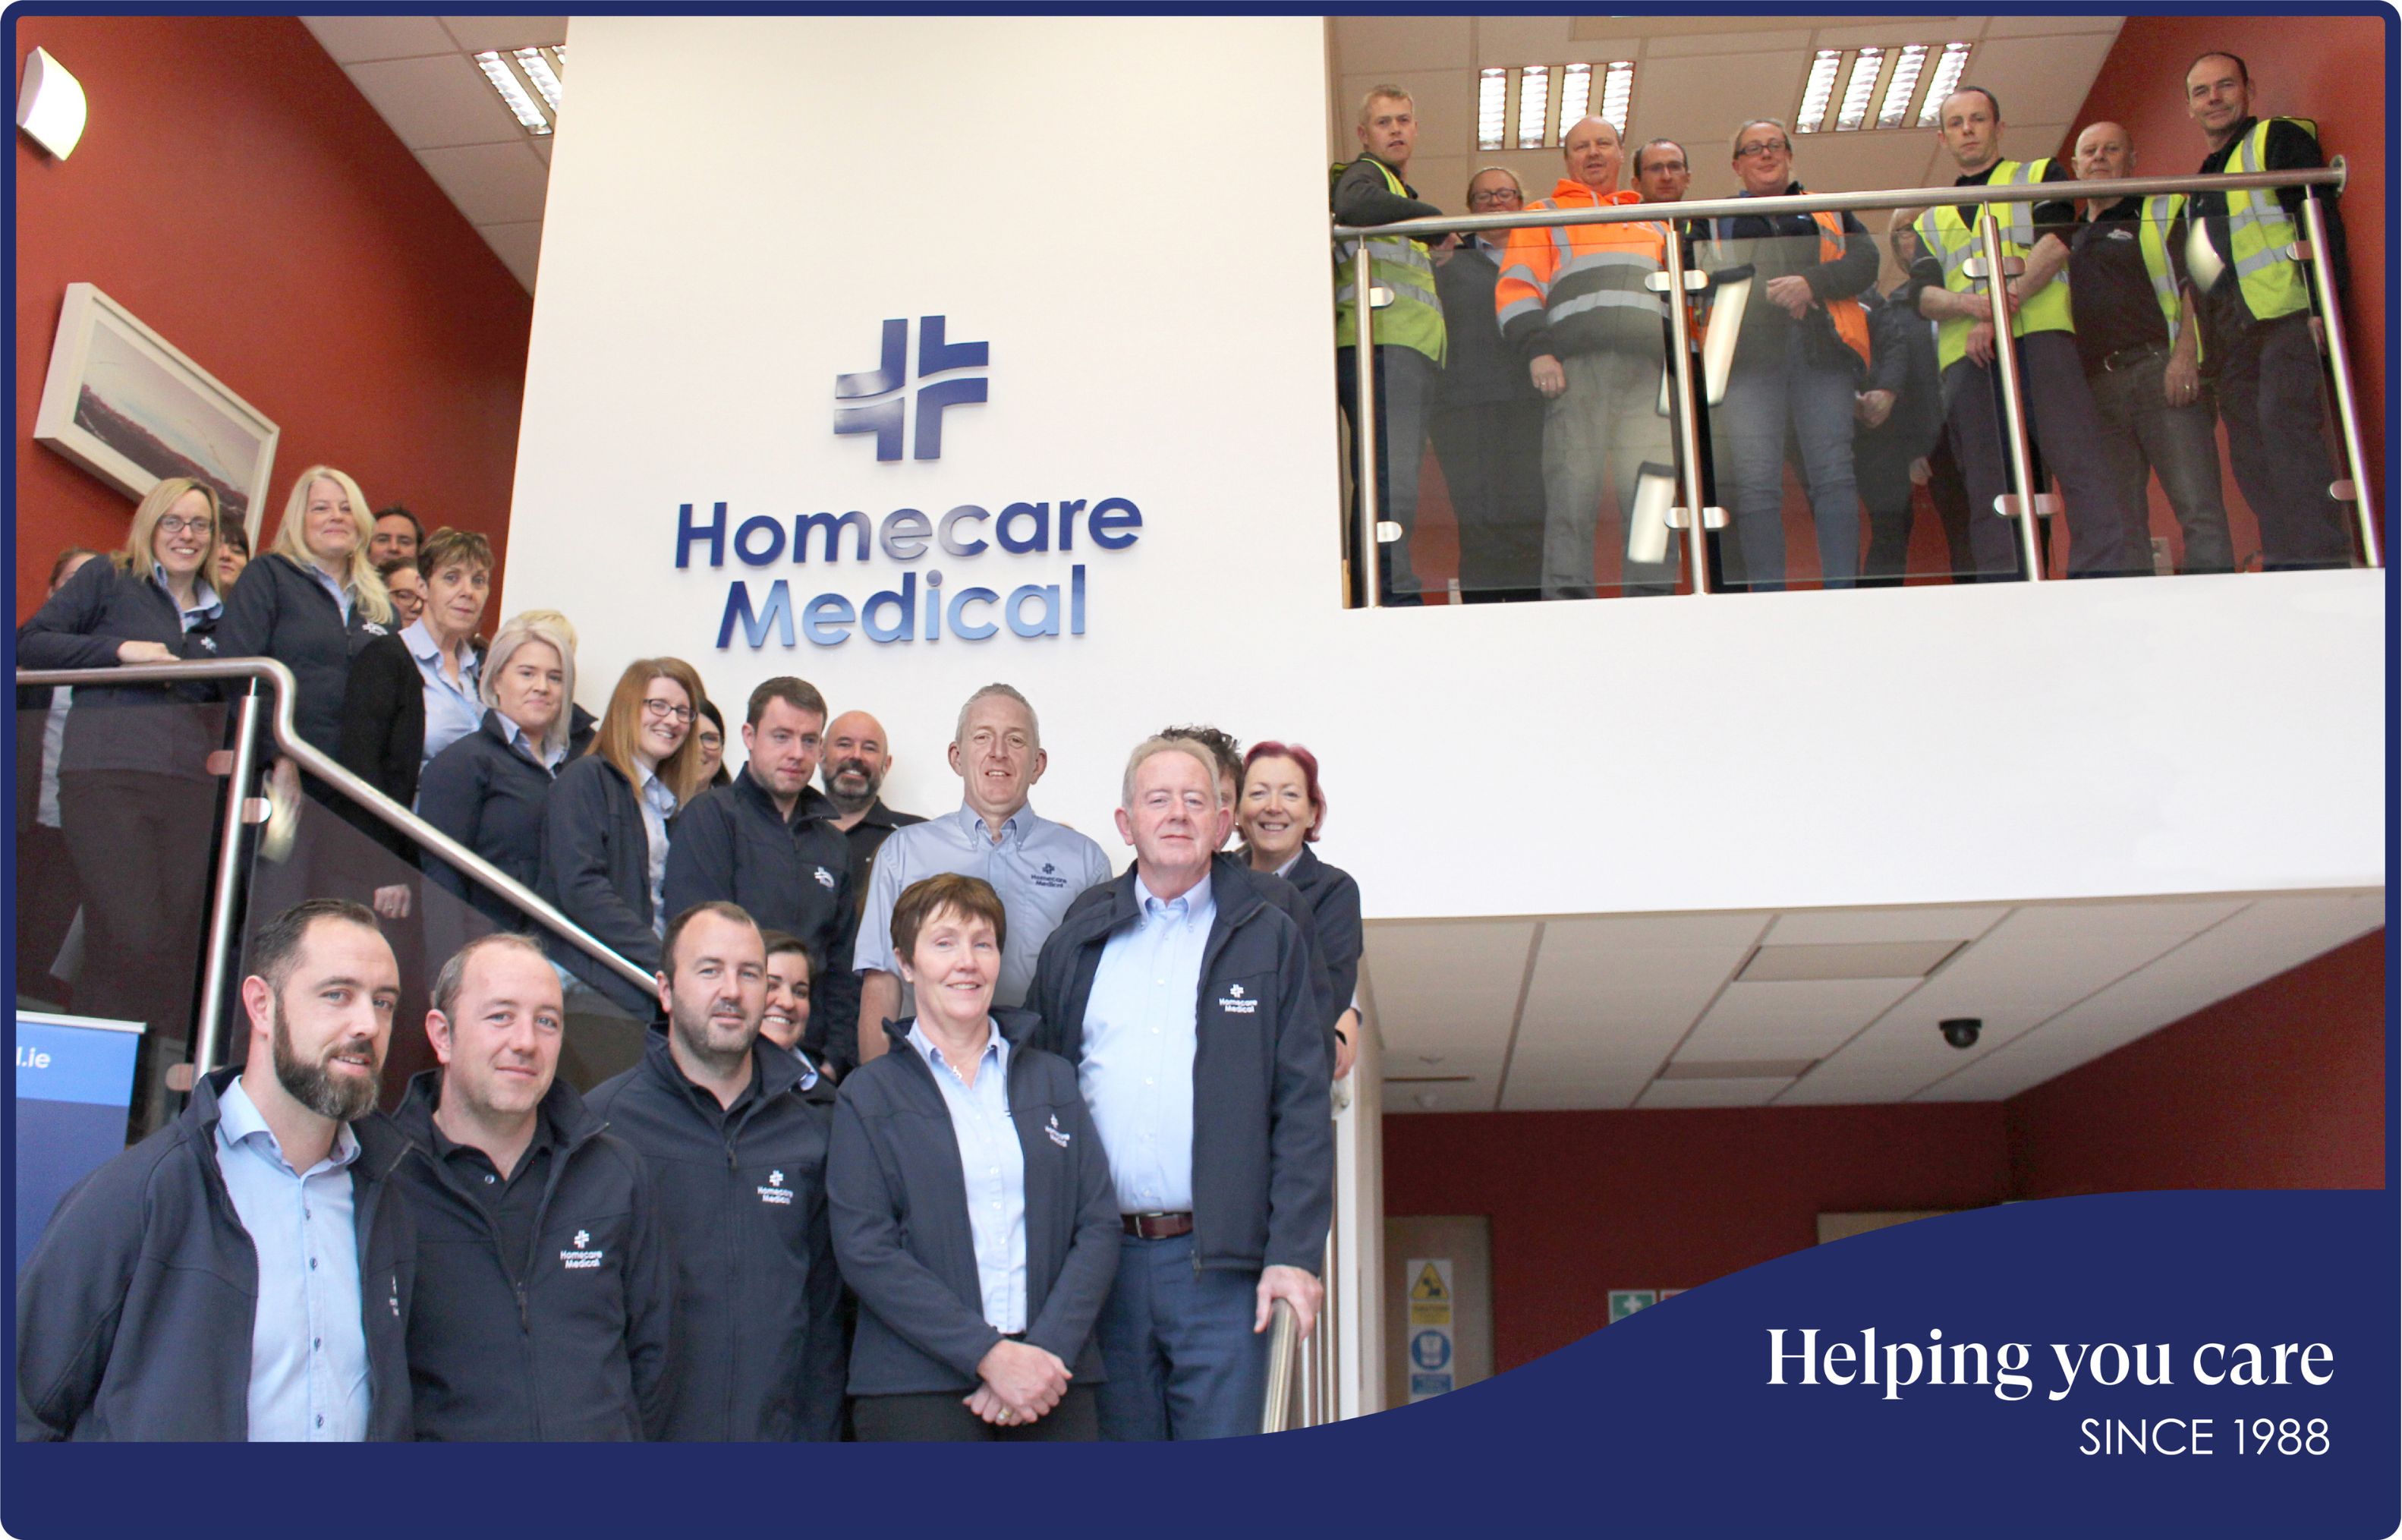 Meet the Homecare Medical team, where we have over 100 employees located all across Ireland